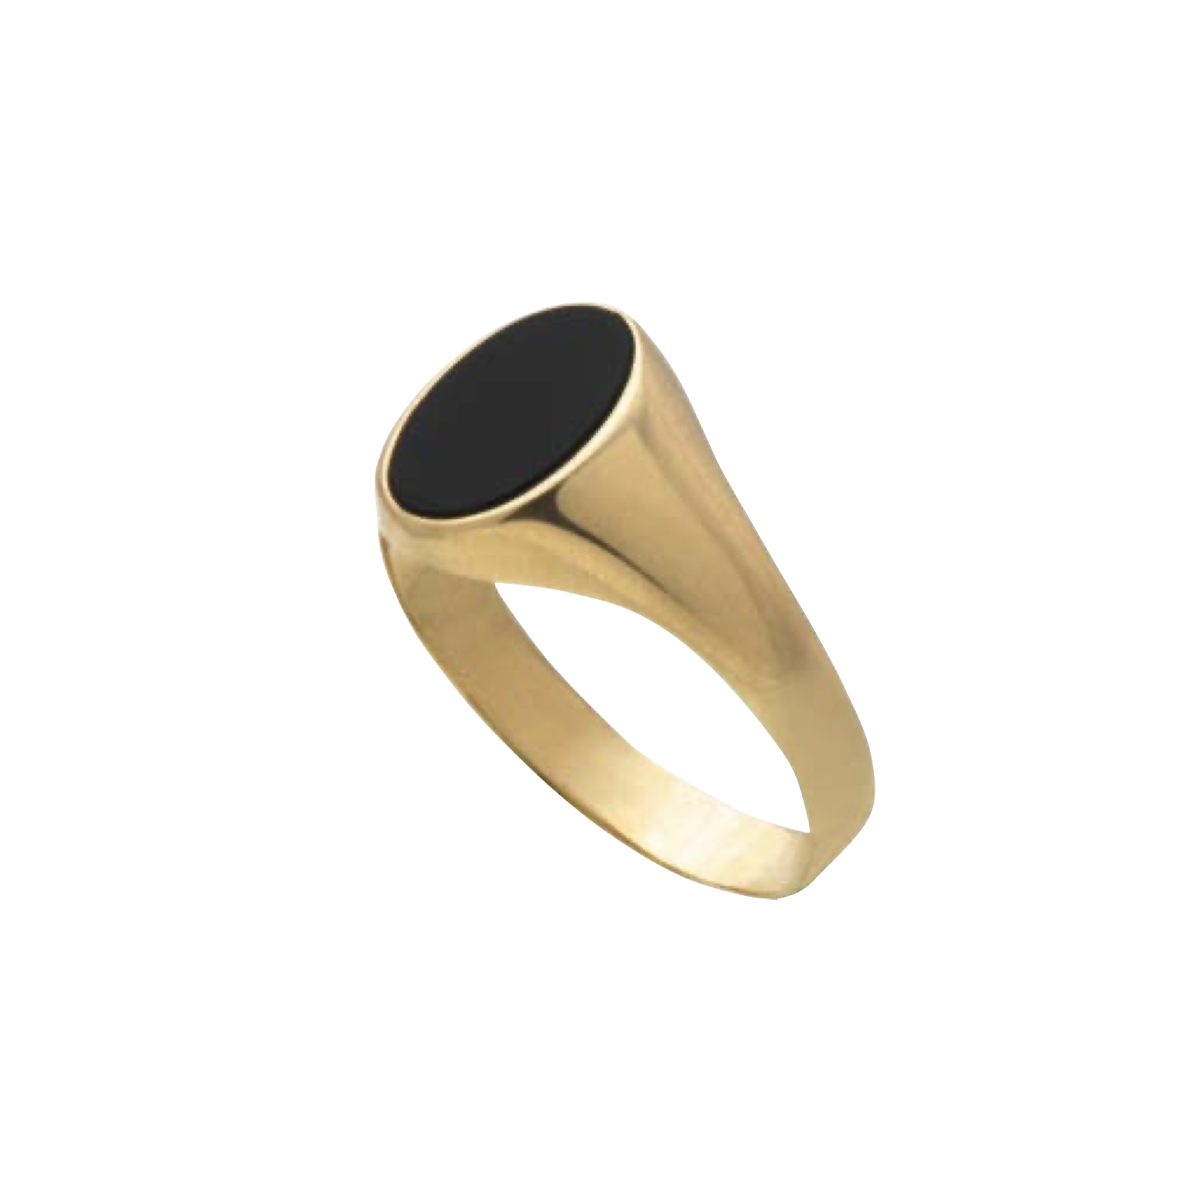 The Oval Gold Signet Ring